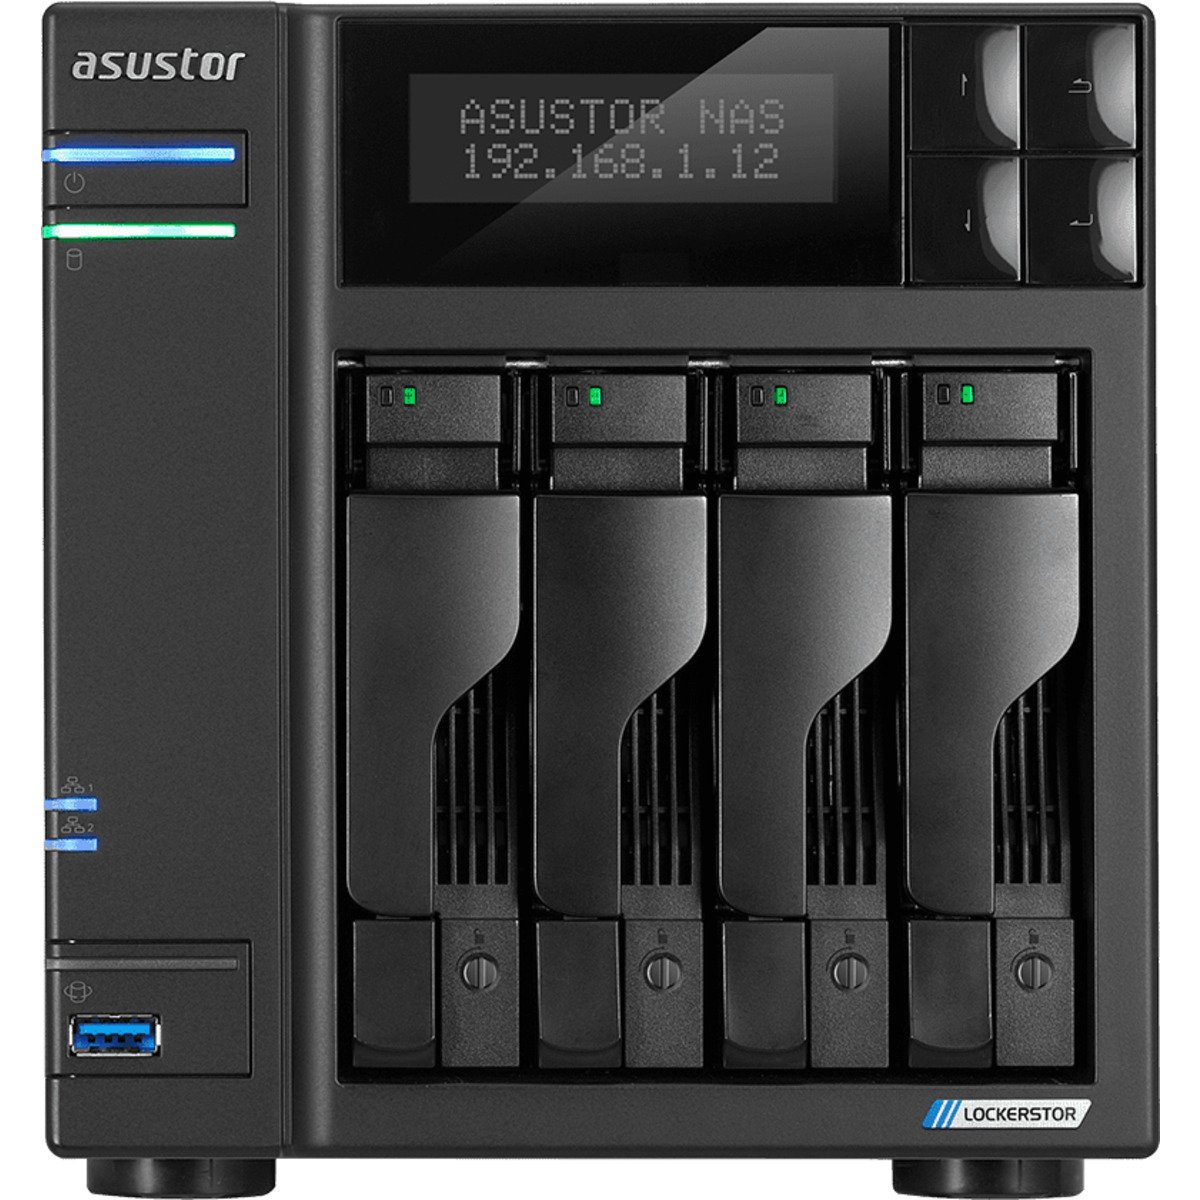 ASUSTOR AS6604T Lockerstor 4 24tb 4-Bay Desktop Multimedia / Power User / Business NAS - Network Attached Storage Device 3x8tb Western Digital Red Pro WD8005FFBX 3.5 7200rpm SATA 6Gb/s HDD NAS Class Drives Installed - Burn-In Tested - FREE RAM UPGRADE AS6604T Lockerstor 4